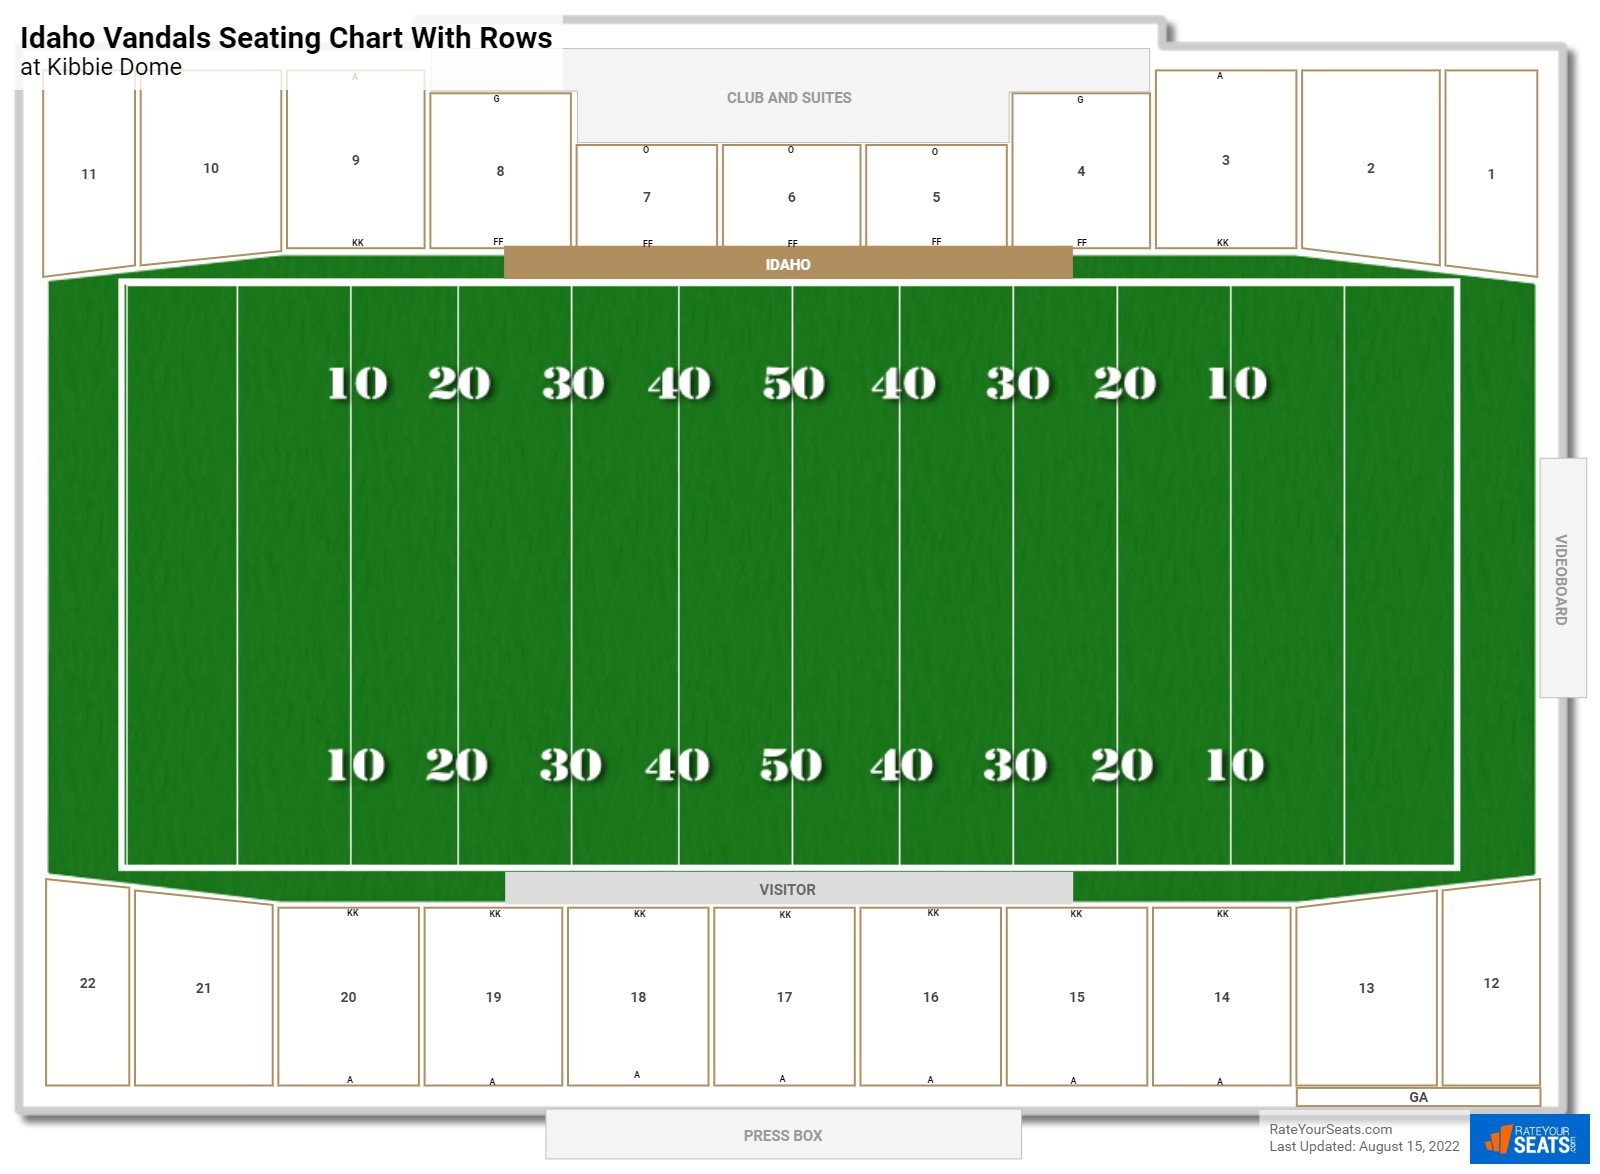 Kibbie Dome seating chart with row numbers